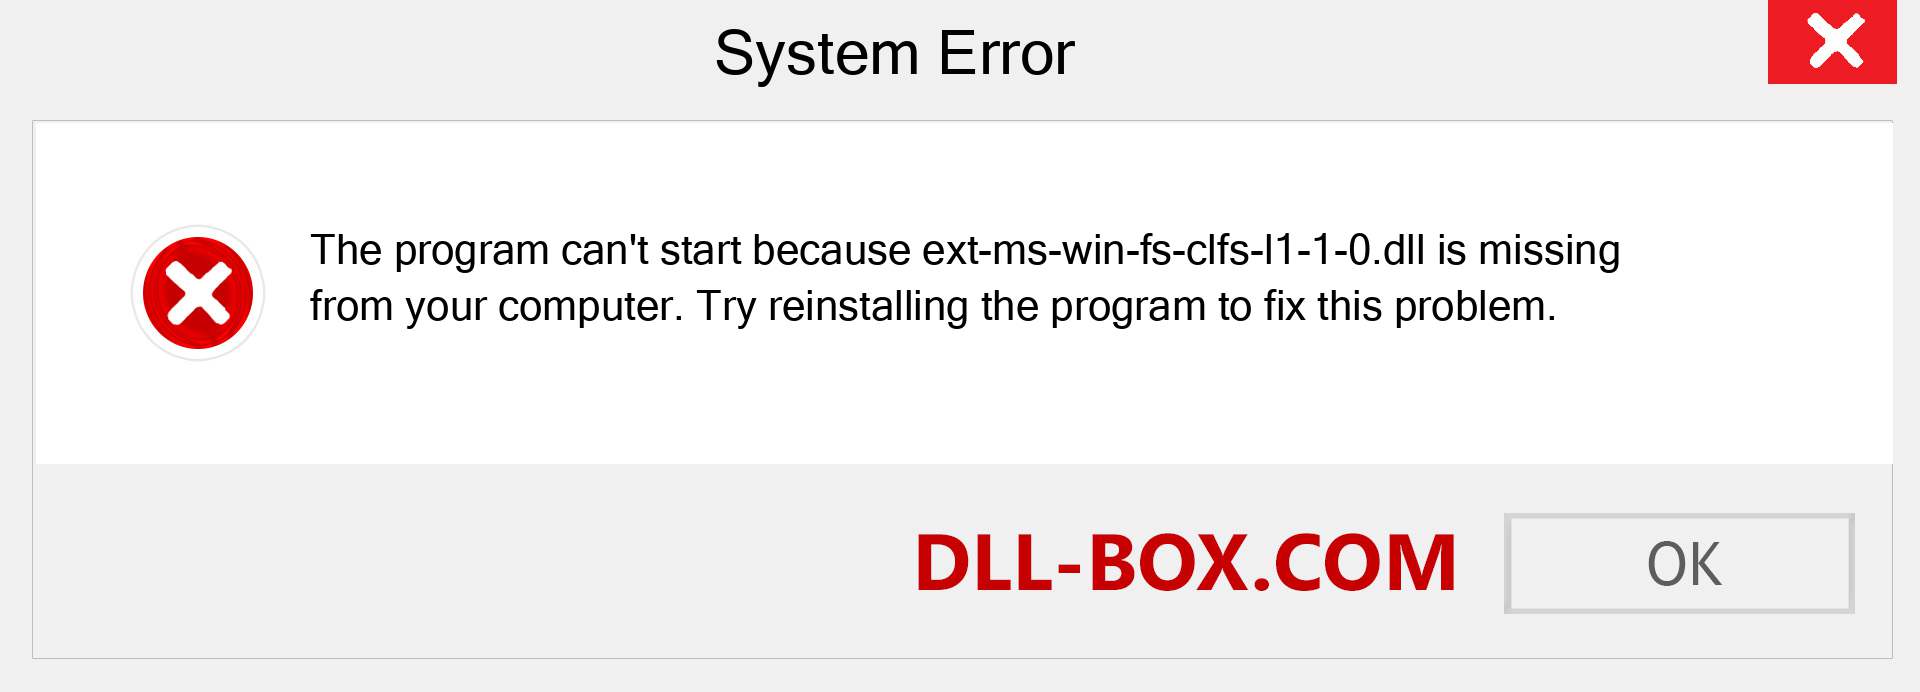  ext-ms-win-fs-clfs-l1-1-0.dll file is missing?. Download for Windows 7, 8, 10 - Fix  ext-ms-win-fs-clfs-l1-1-0 dll Missing Error on Windows, photos, images